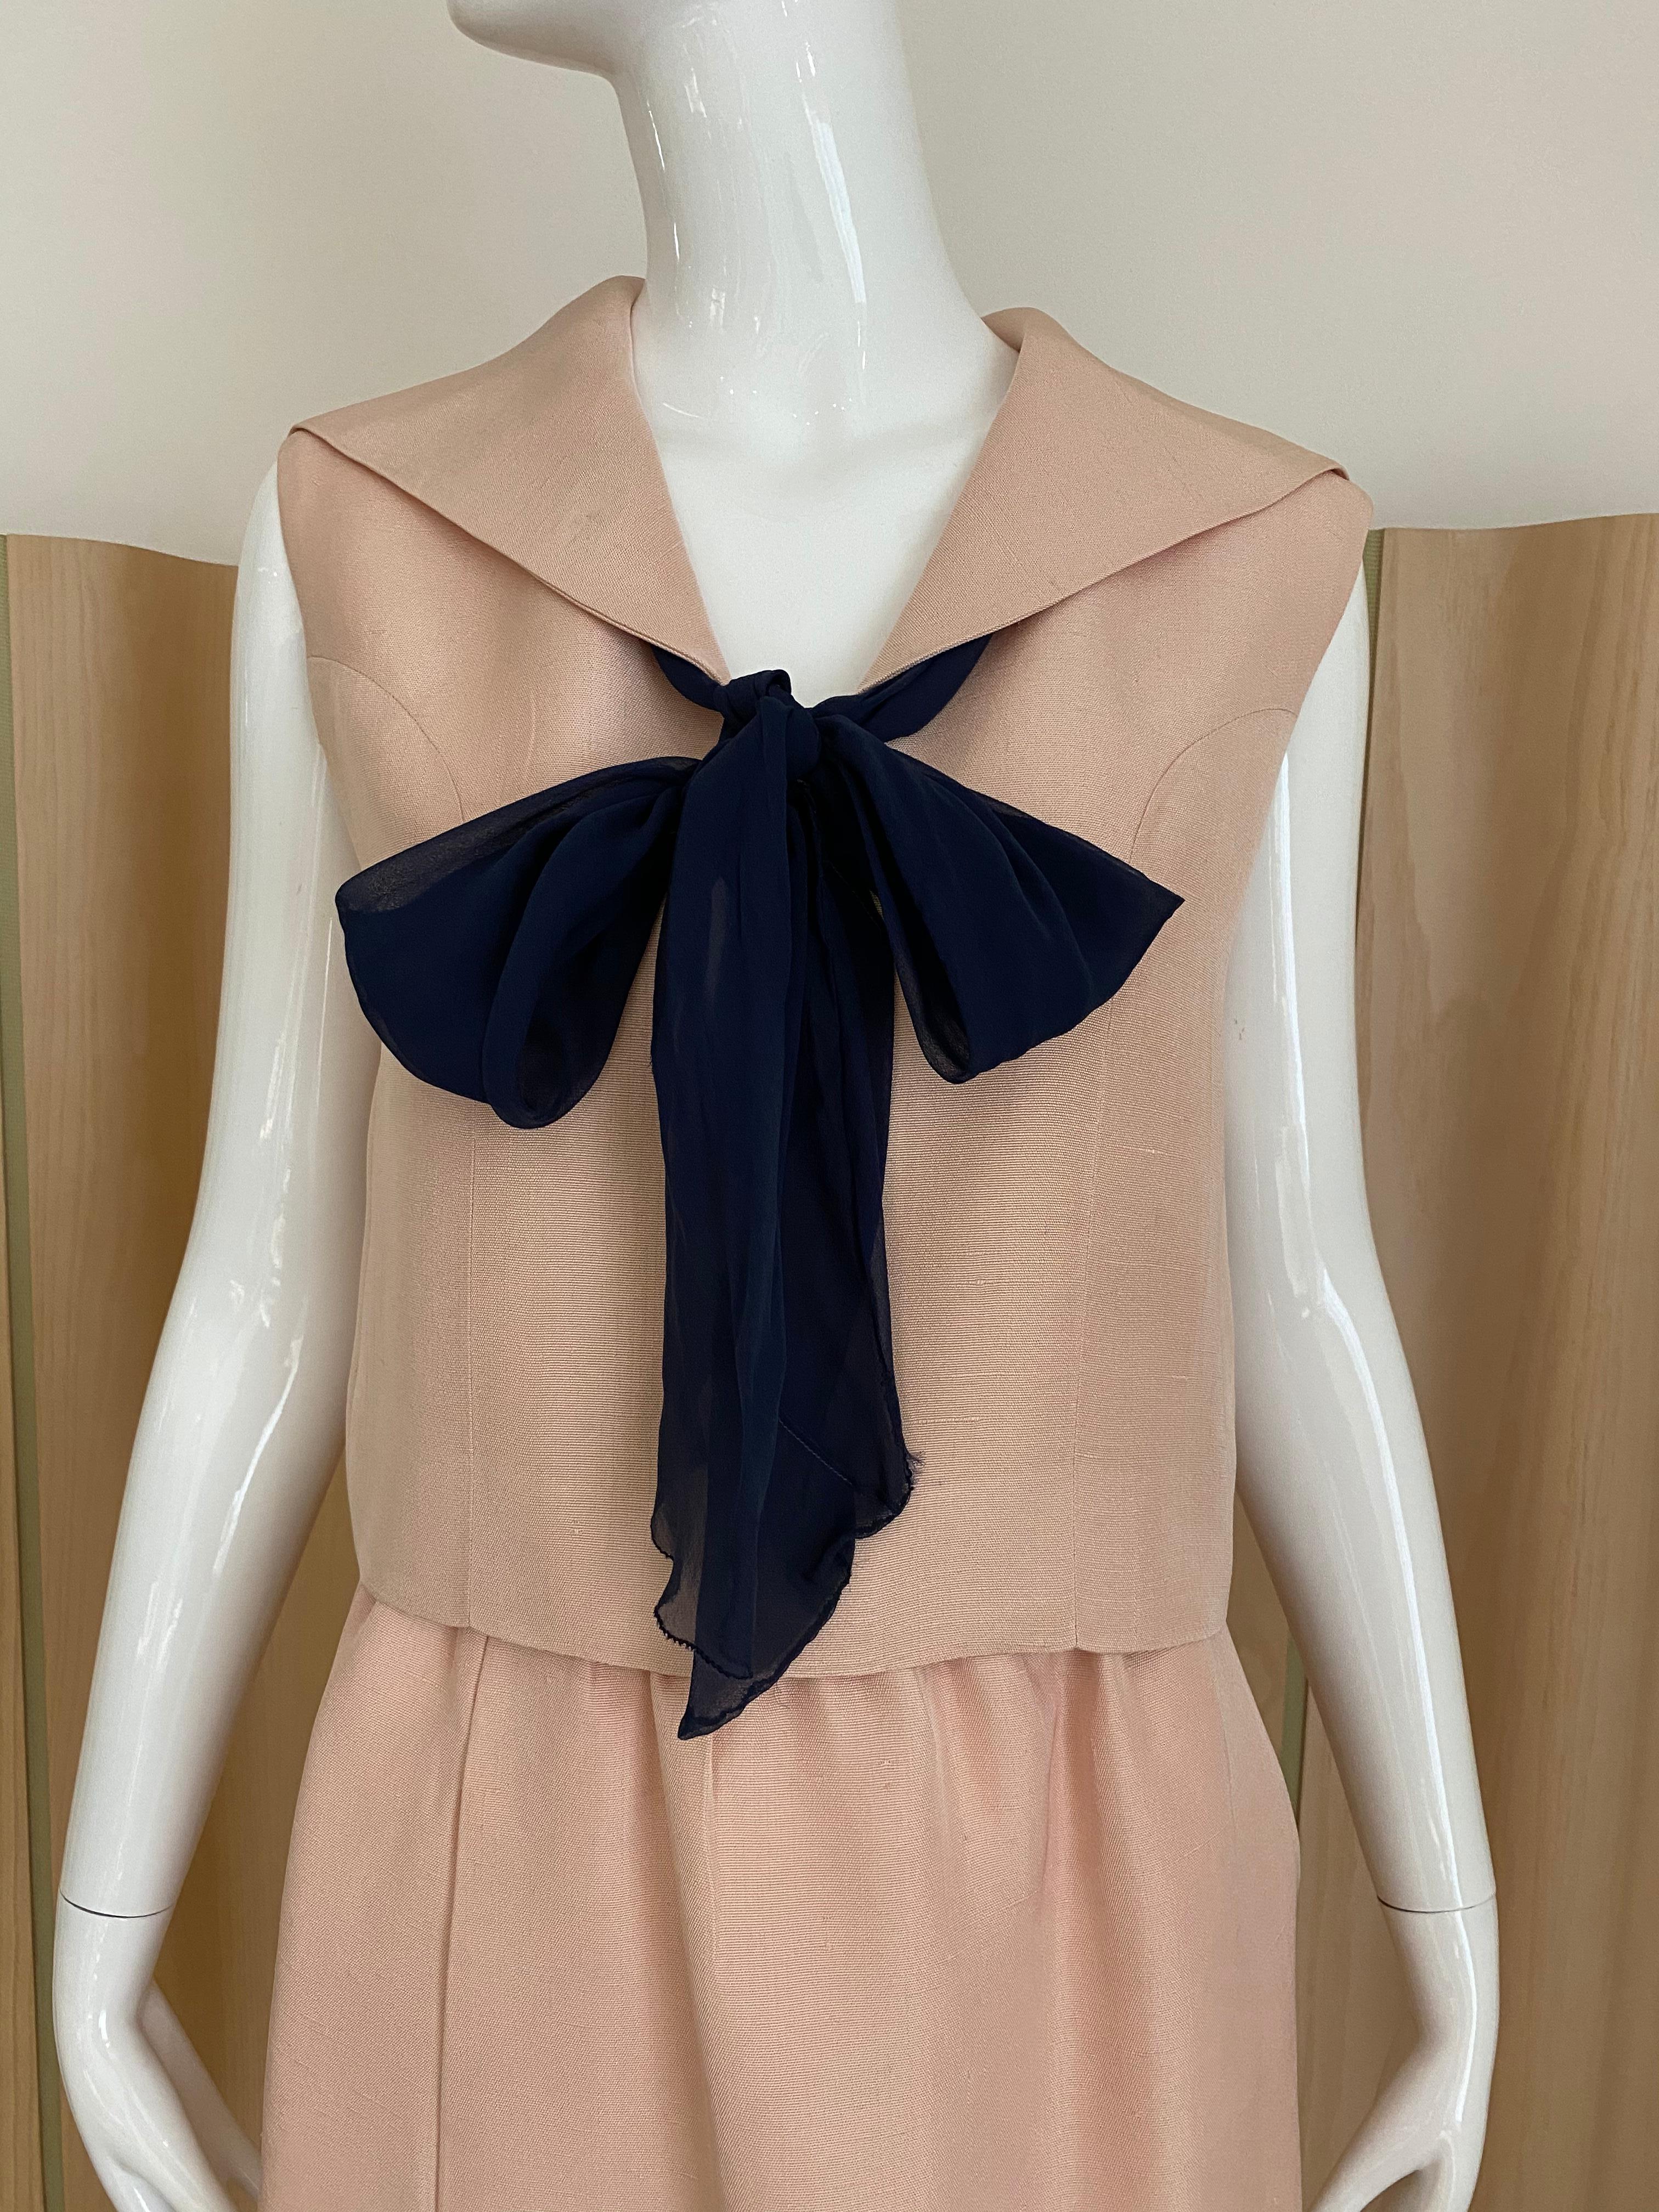 Chic vintage Norell - Tassel silk blouse in light peach color. Sleeveless top with black silk bow. Fitted Skirt.
Fit size 2/4
Blouse measurement: 
Skirt measurement: Waist 26”
** flaws on the skirt ( see image)